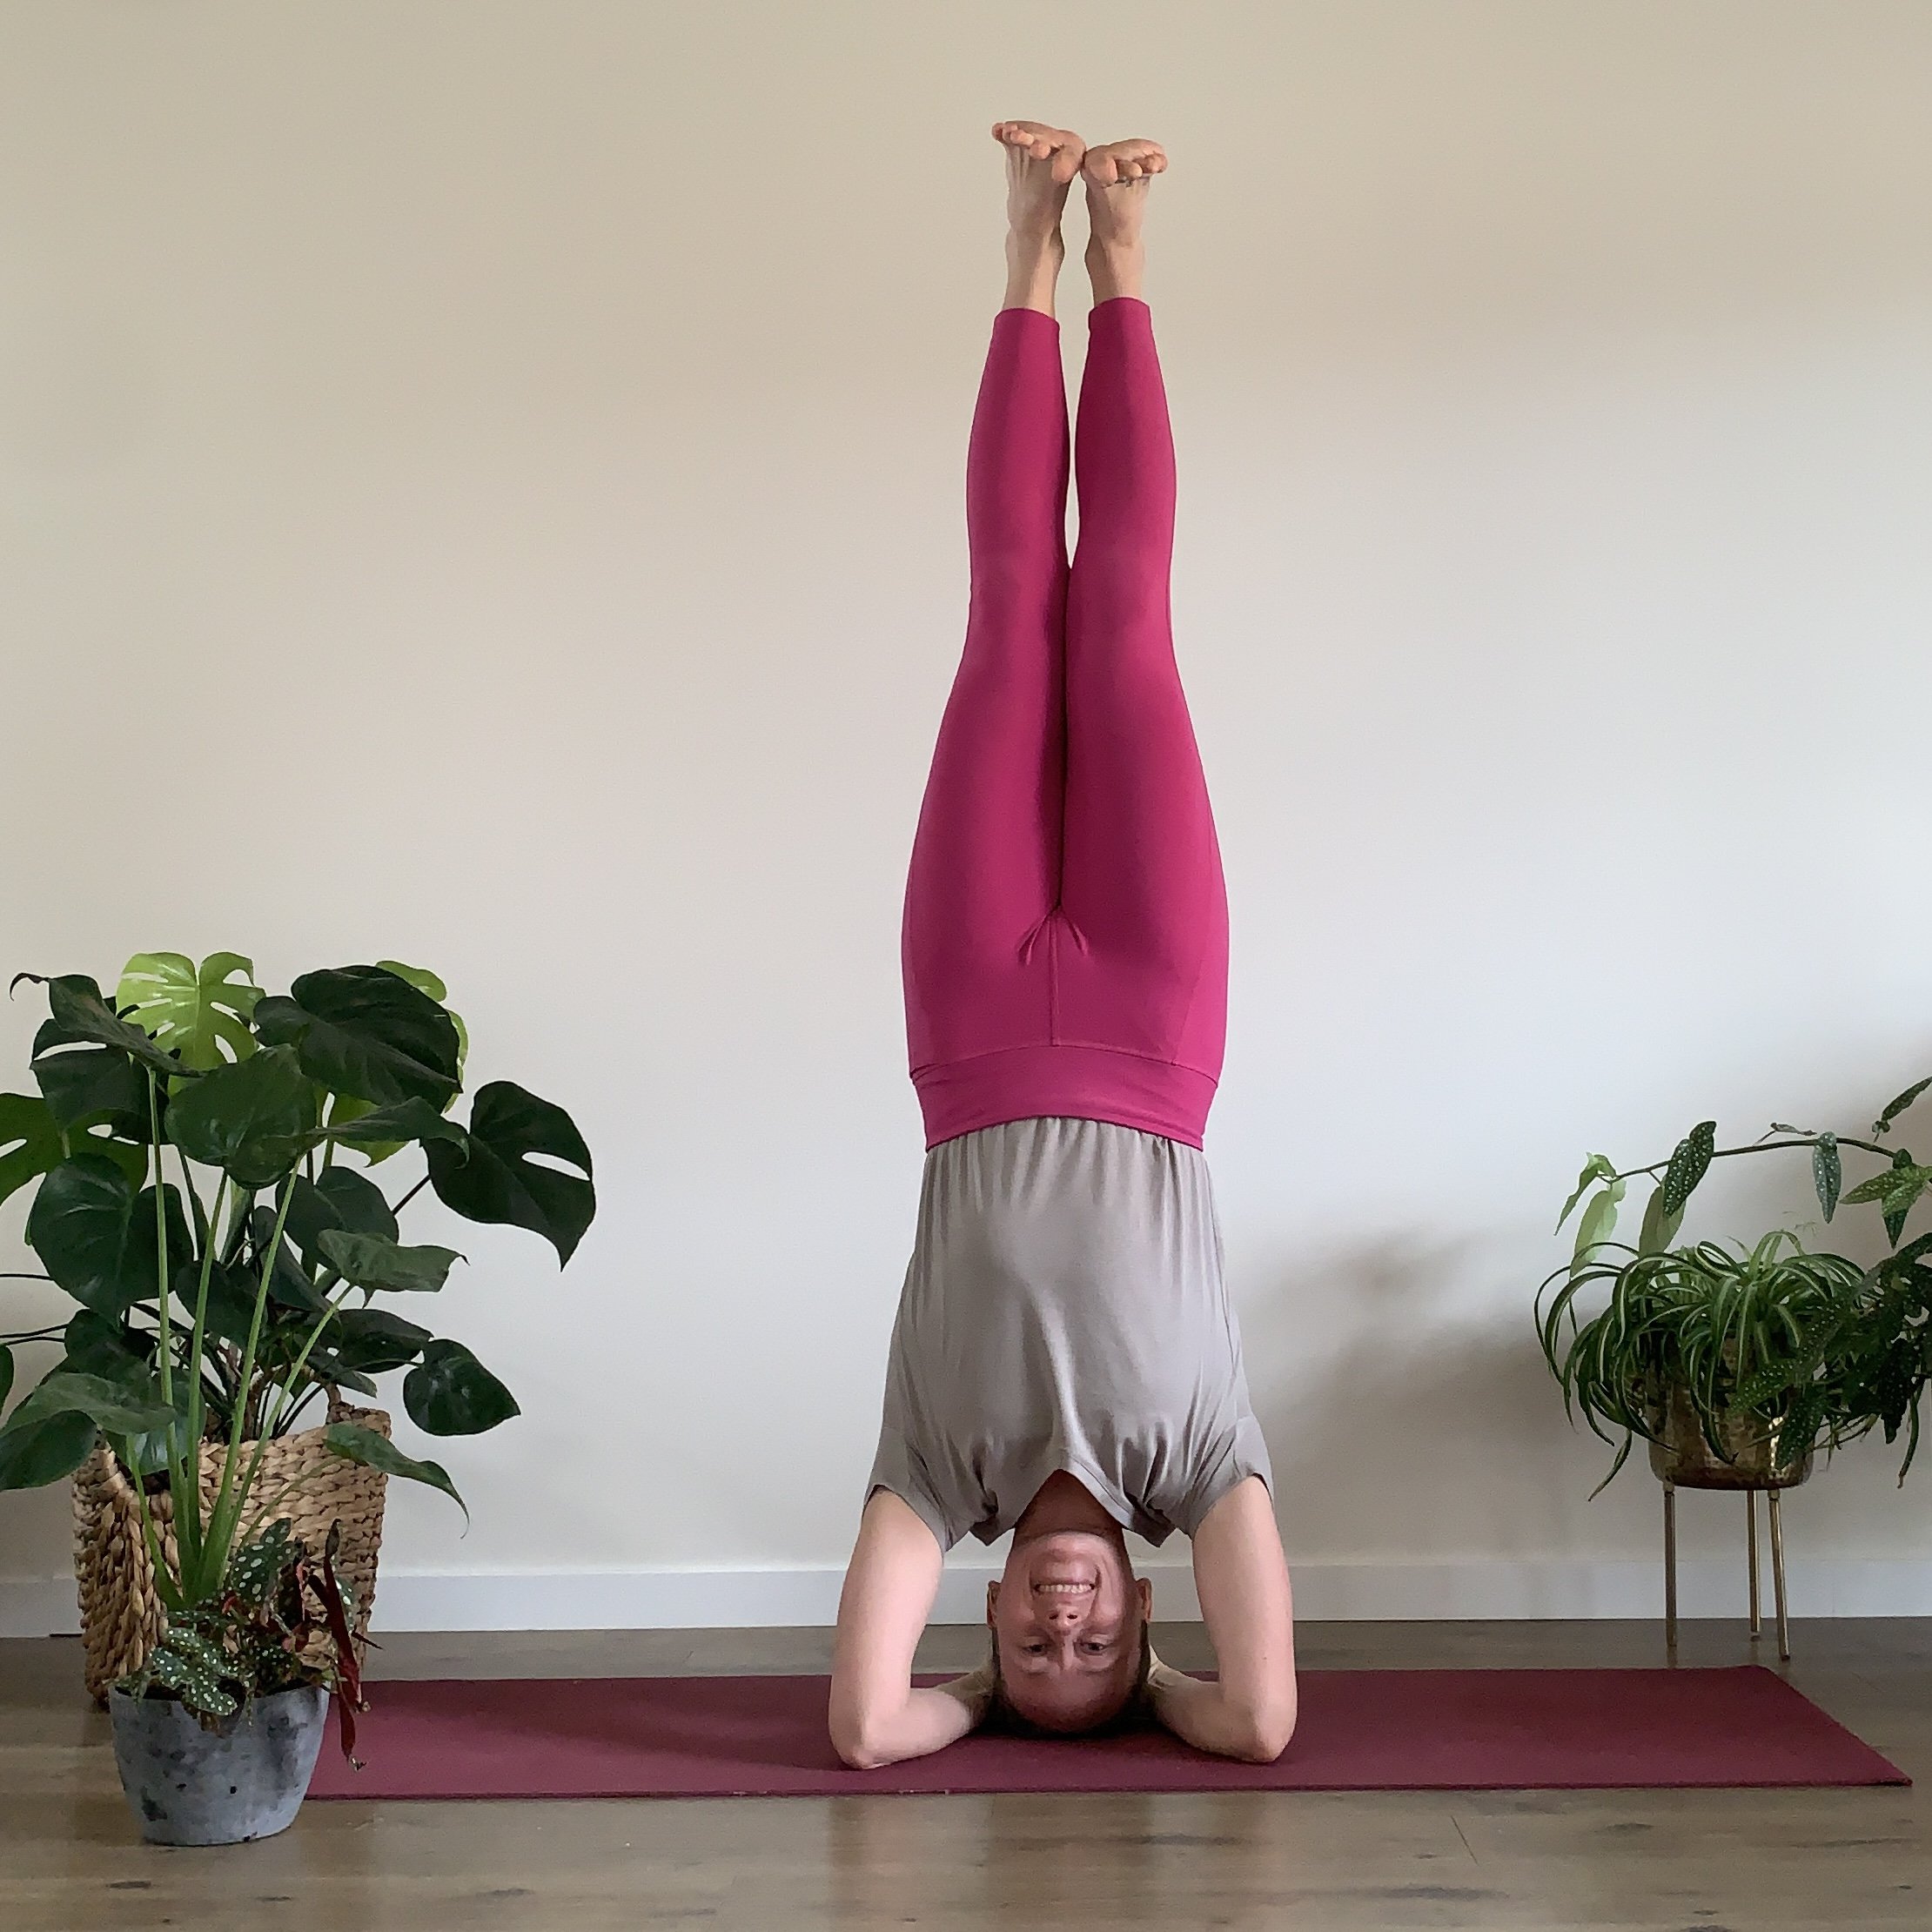 Yoga Headstand: Why it's healthy for you and how to learn it